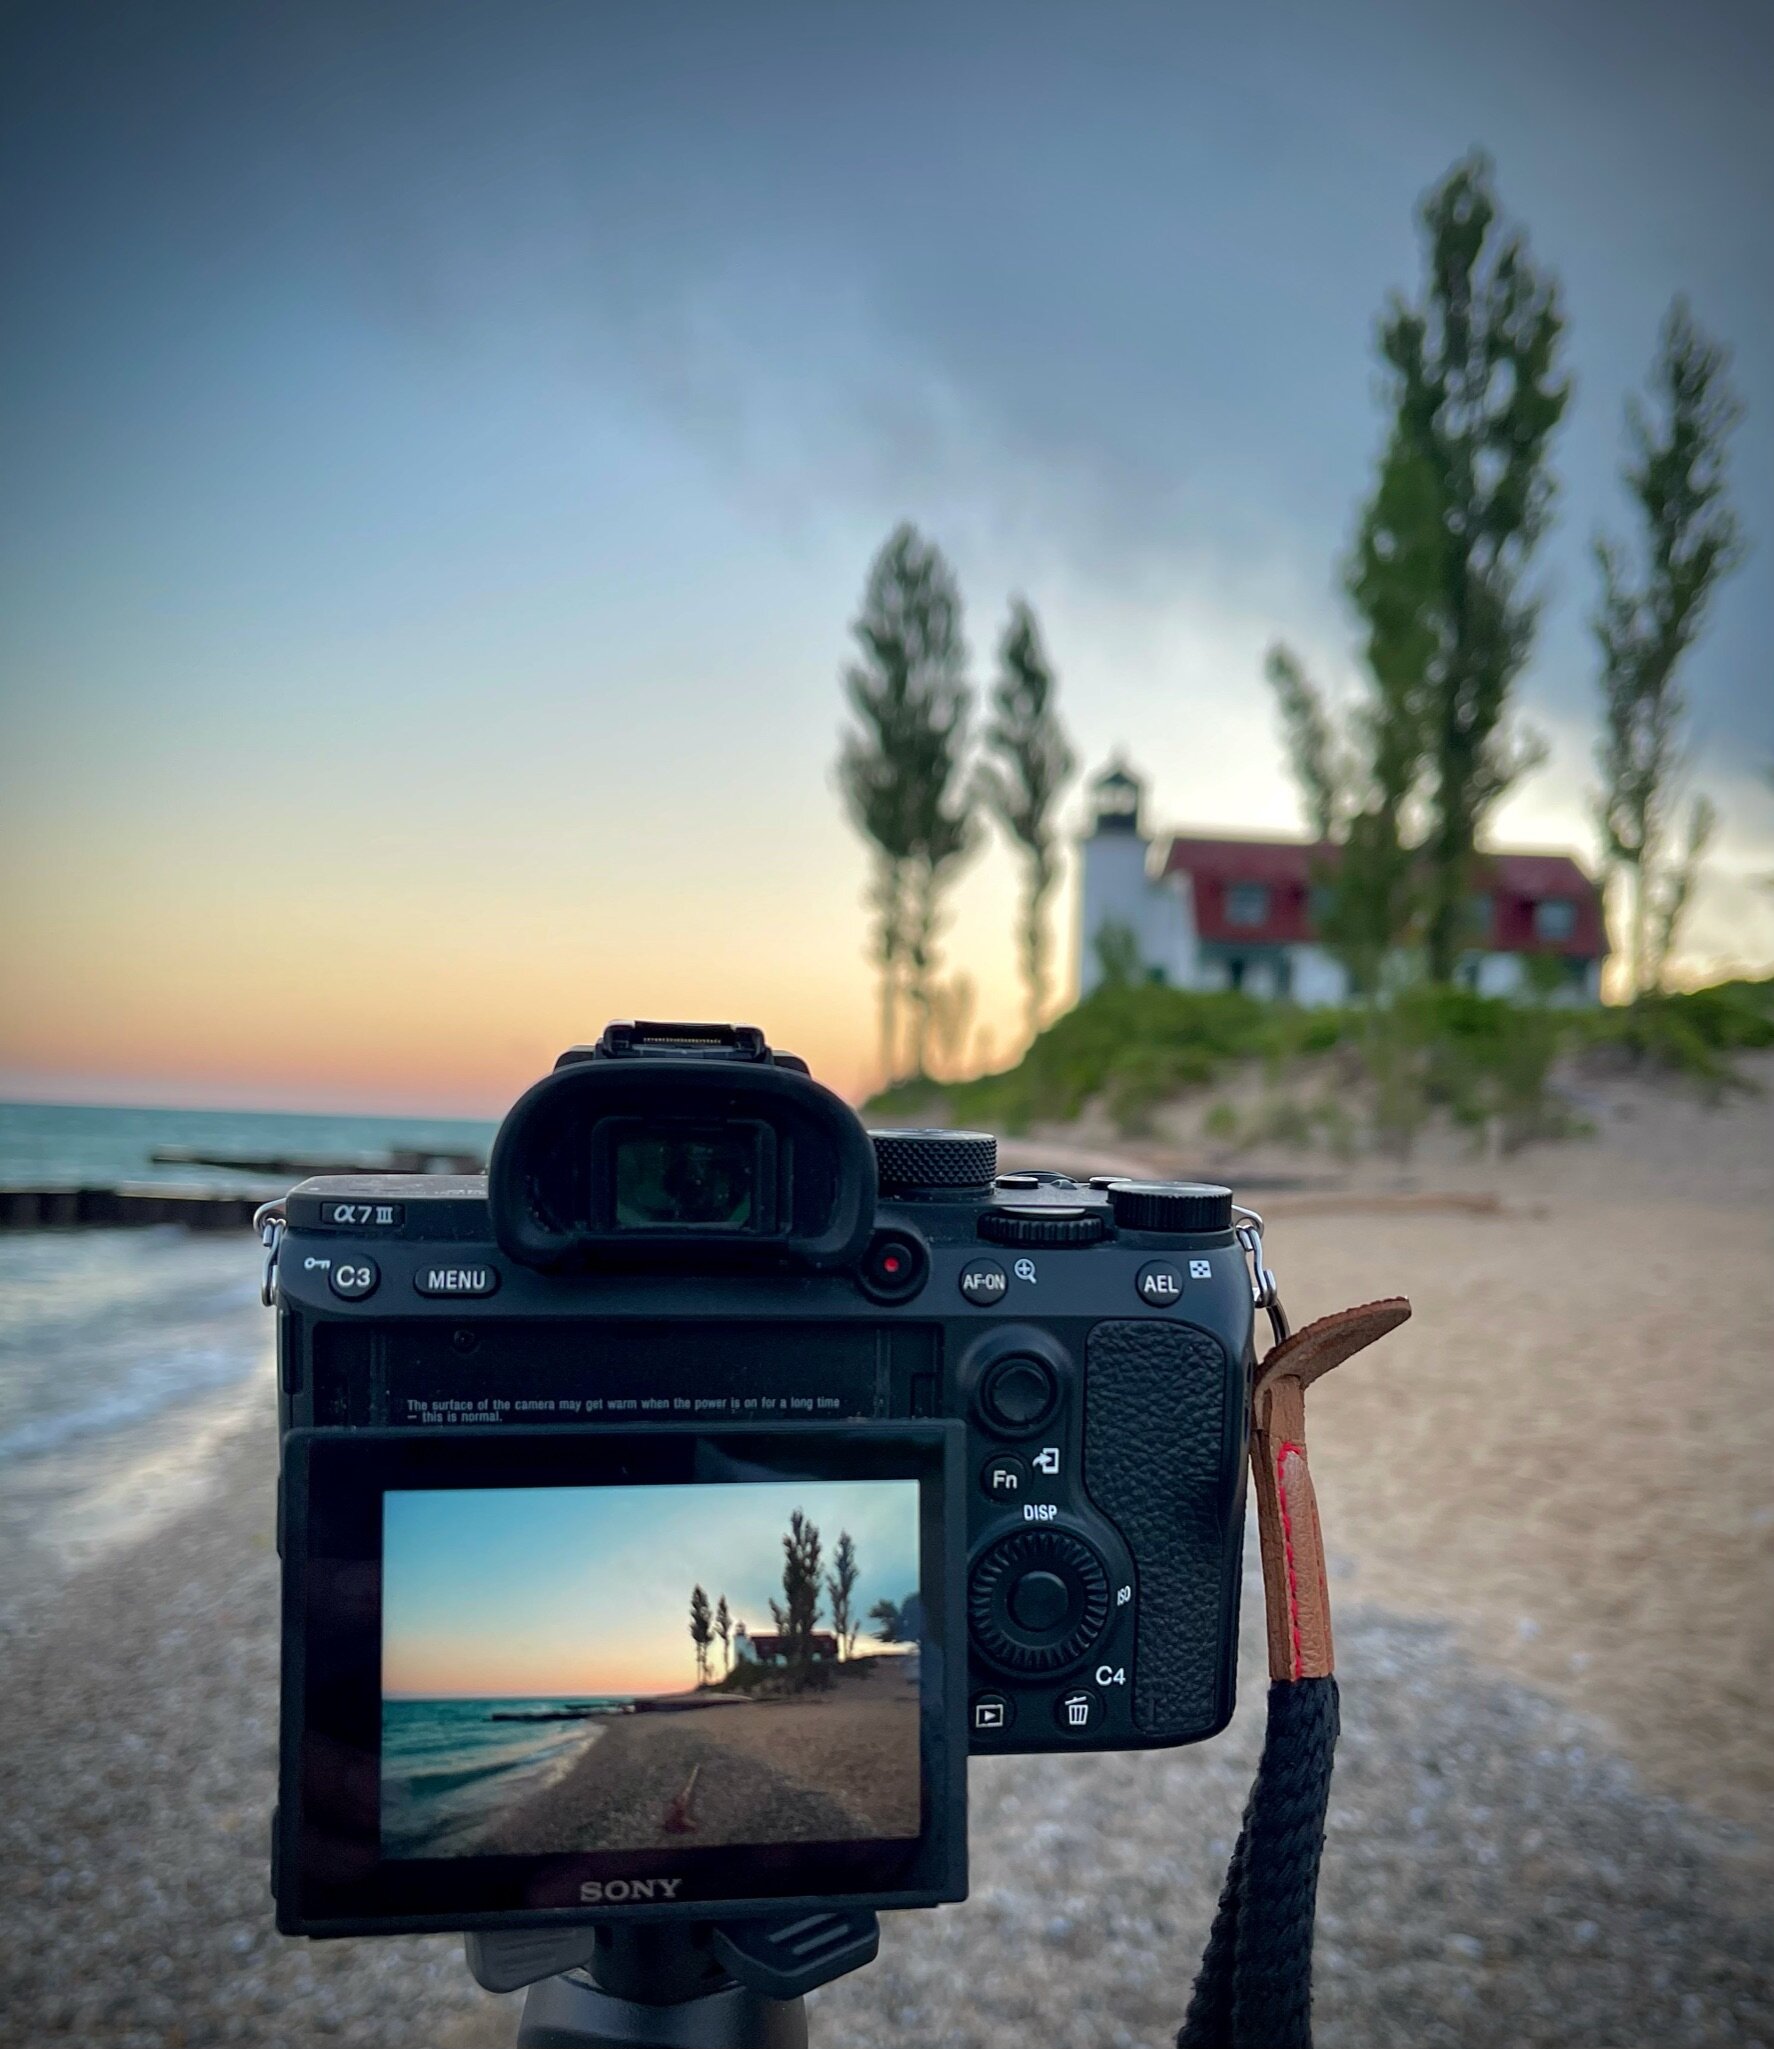  Because of its picturesque form and location,  Point Betsie Lighthouse  on Sleeping Bear Lakeshore is said to be one of America's most photographed lighthouses. Often the subject of photographs and other types of art, Point Betsie seems to have insp